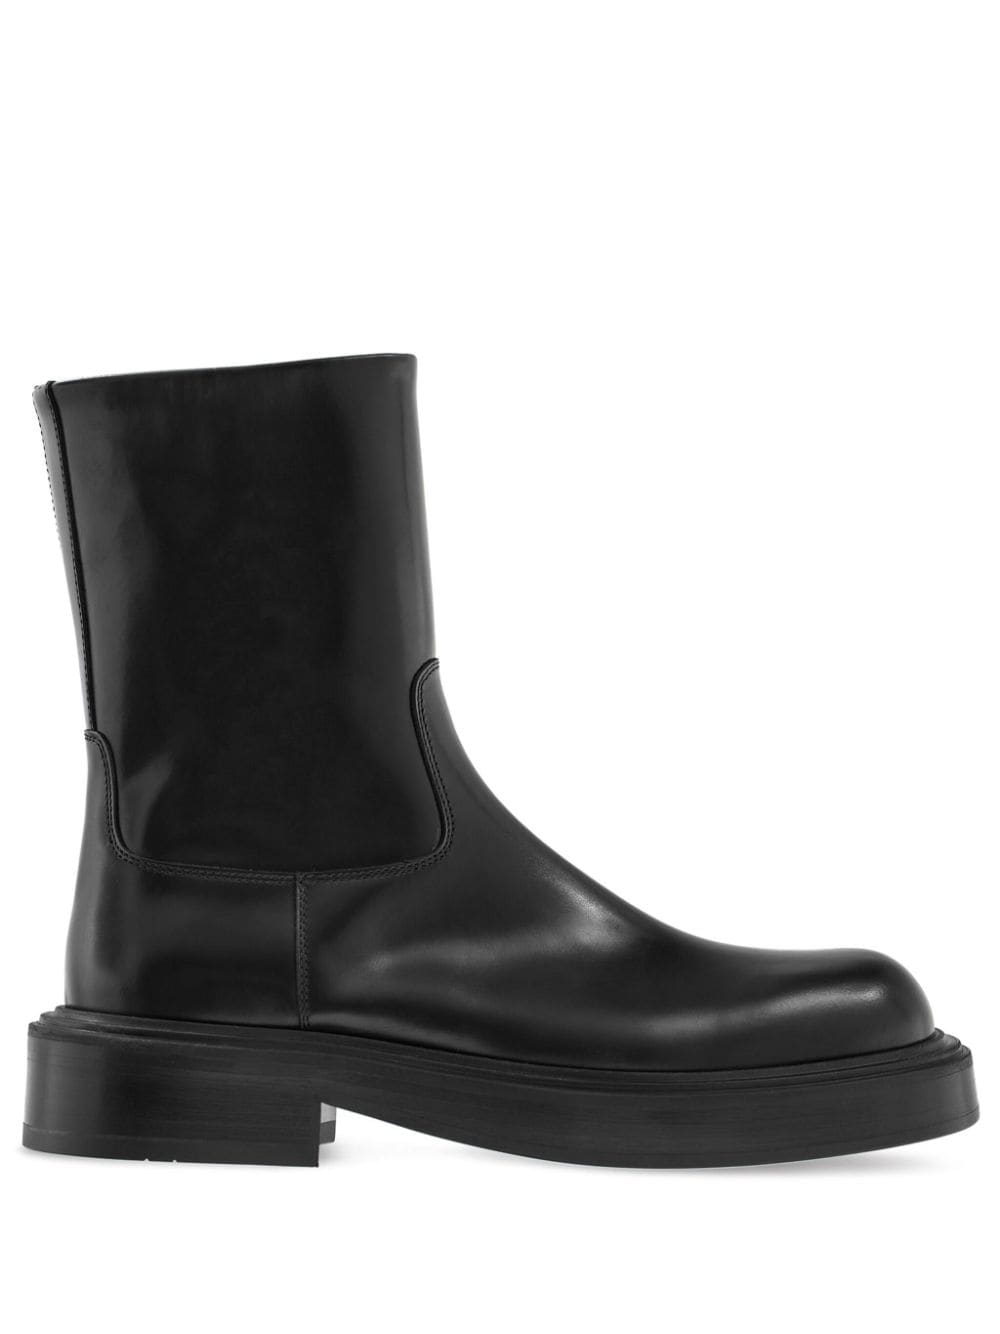 Ferragamo 20mm leather ankle boots - Black